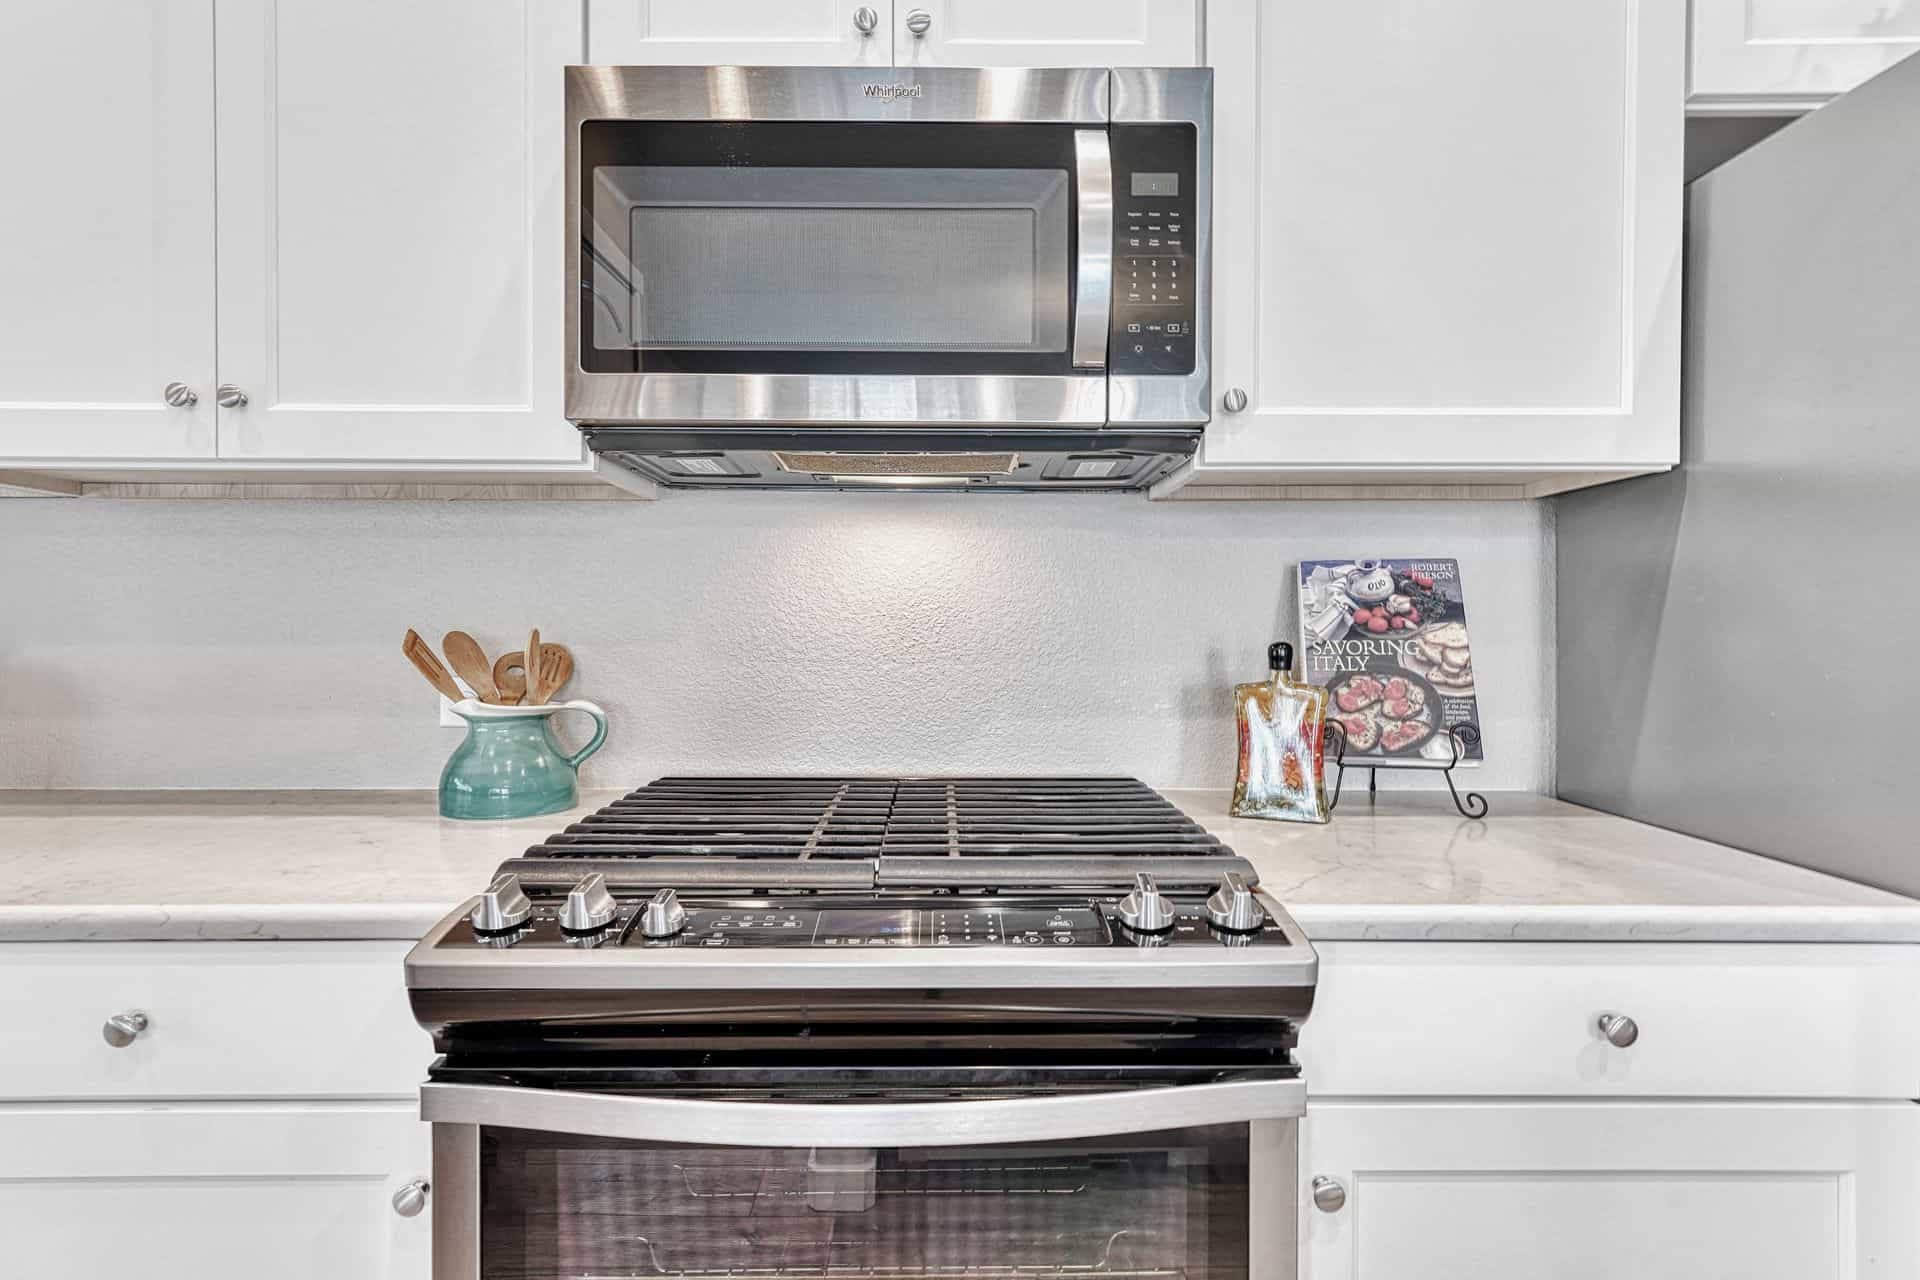 5-Burner Gas Range Oven and Built-In Microwave